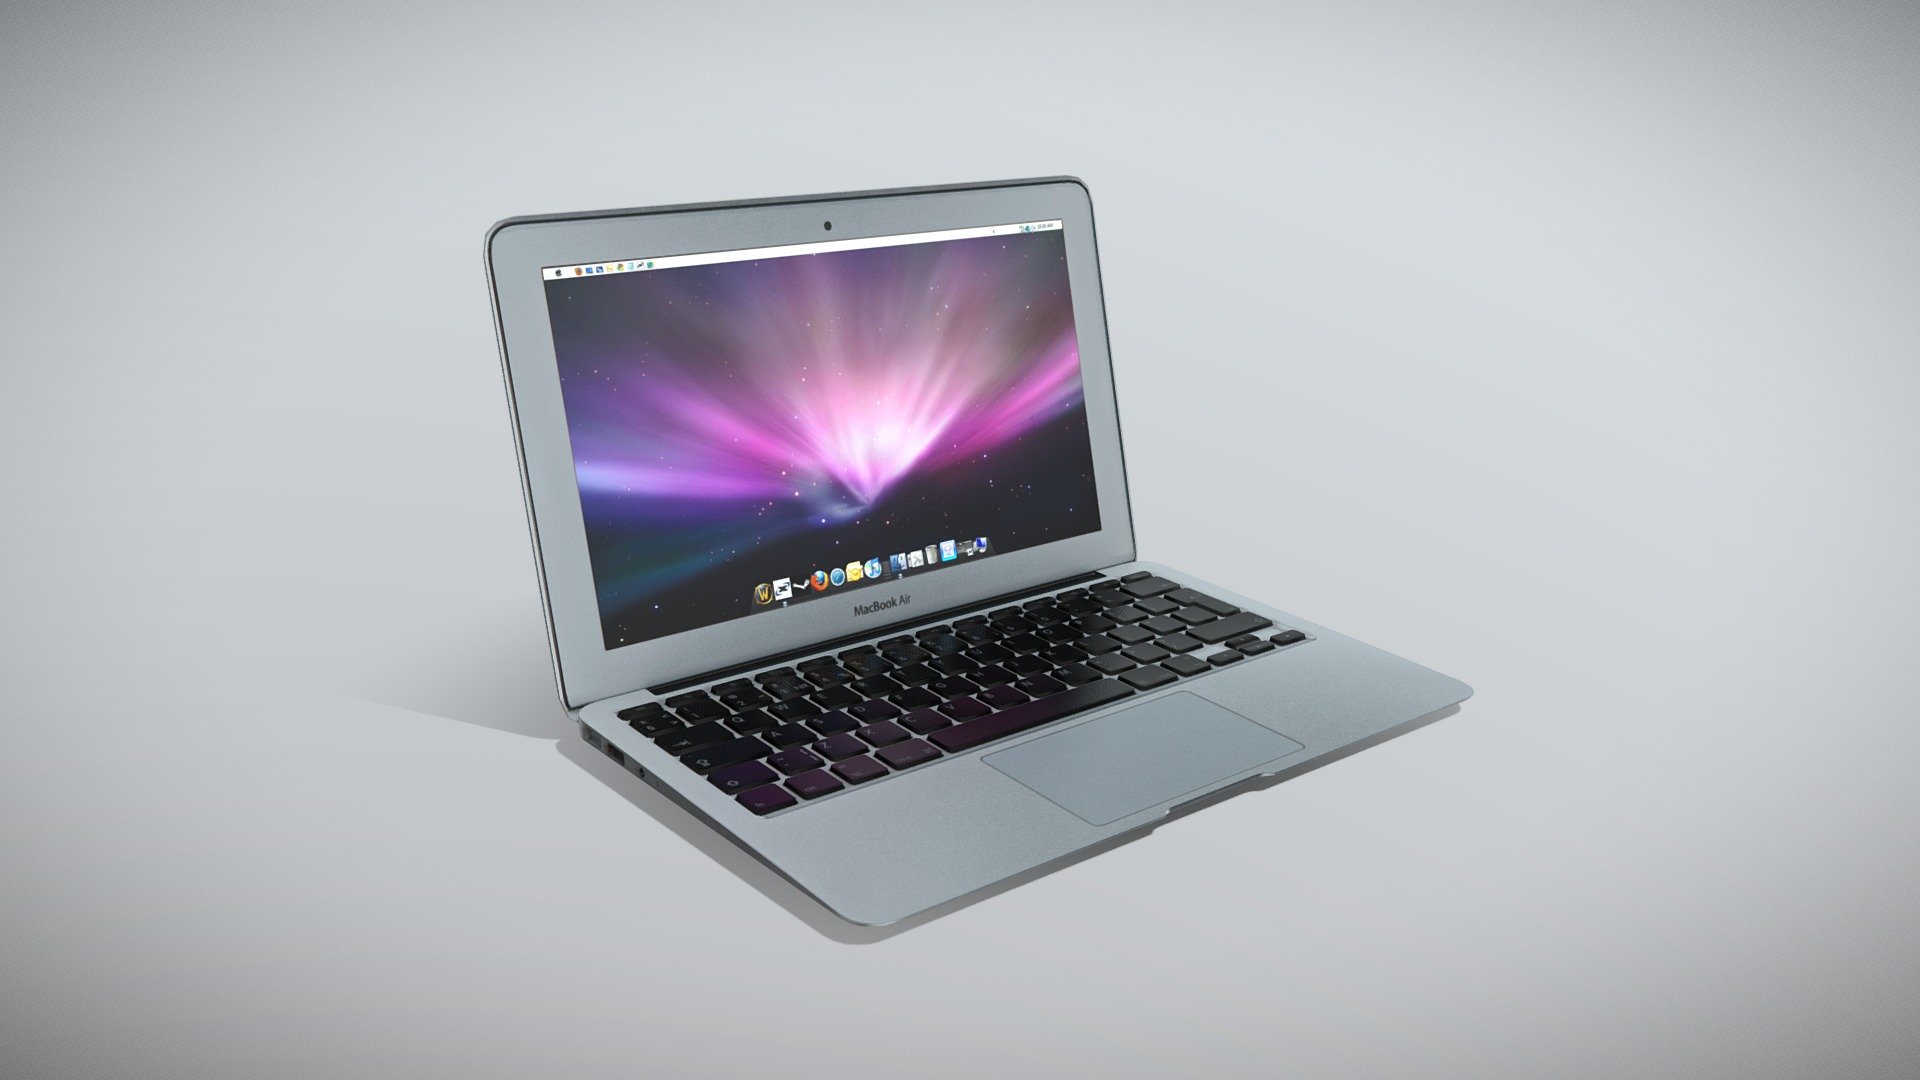 •   Let me present to you simple low-poly 3D model Apple MacBook Air 11 2010. Modeling was made with ortho-photos of real laptop that is why all details of design are recreated most authentically

•    This model consists of two meshes, it is low-polygonal and it has only one material.

•   The total of the main textures is 1. Resolution of texture is 4096 pixels square aspect ratio in .jpg format. 

•   Polygon count of the model is – 2746.

•   The model has correct dimensions in real-world scale. All parts grouped and named correctly.

•   To use the model in other 3D programs there are scenes saved in formats .fbx, .obj, .DAE, .max (2010 version).

Note: If you see some artifacts on the textures, it means compression works in the Viewer. We recommend setting HD quality for textures. But anyway, original textures have no artifacts 3d model